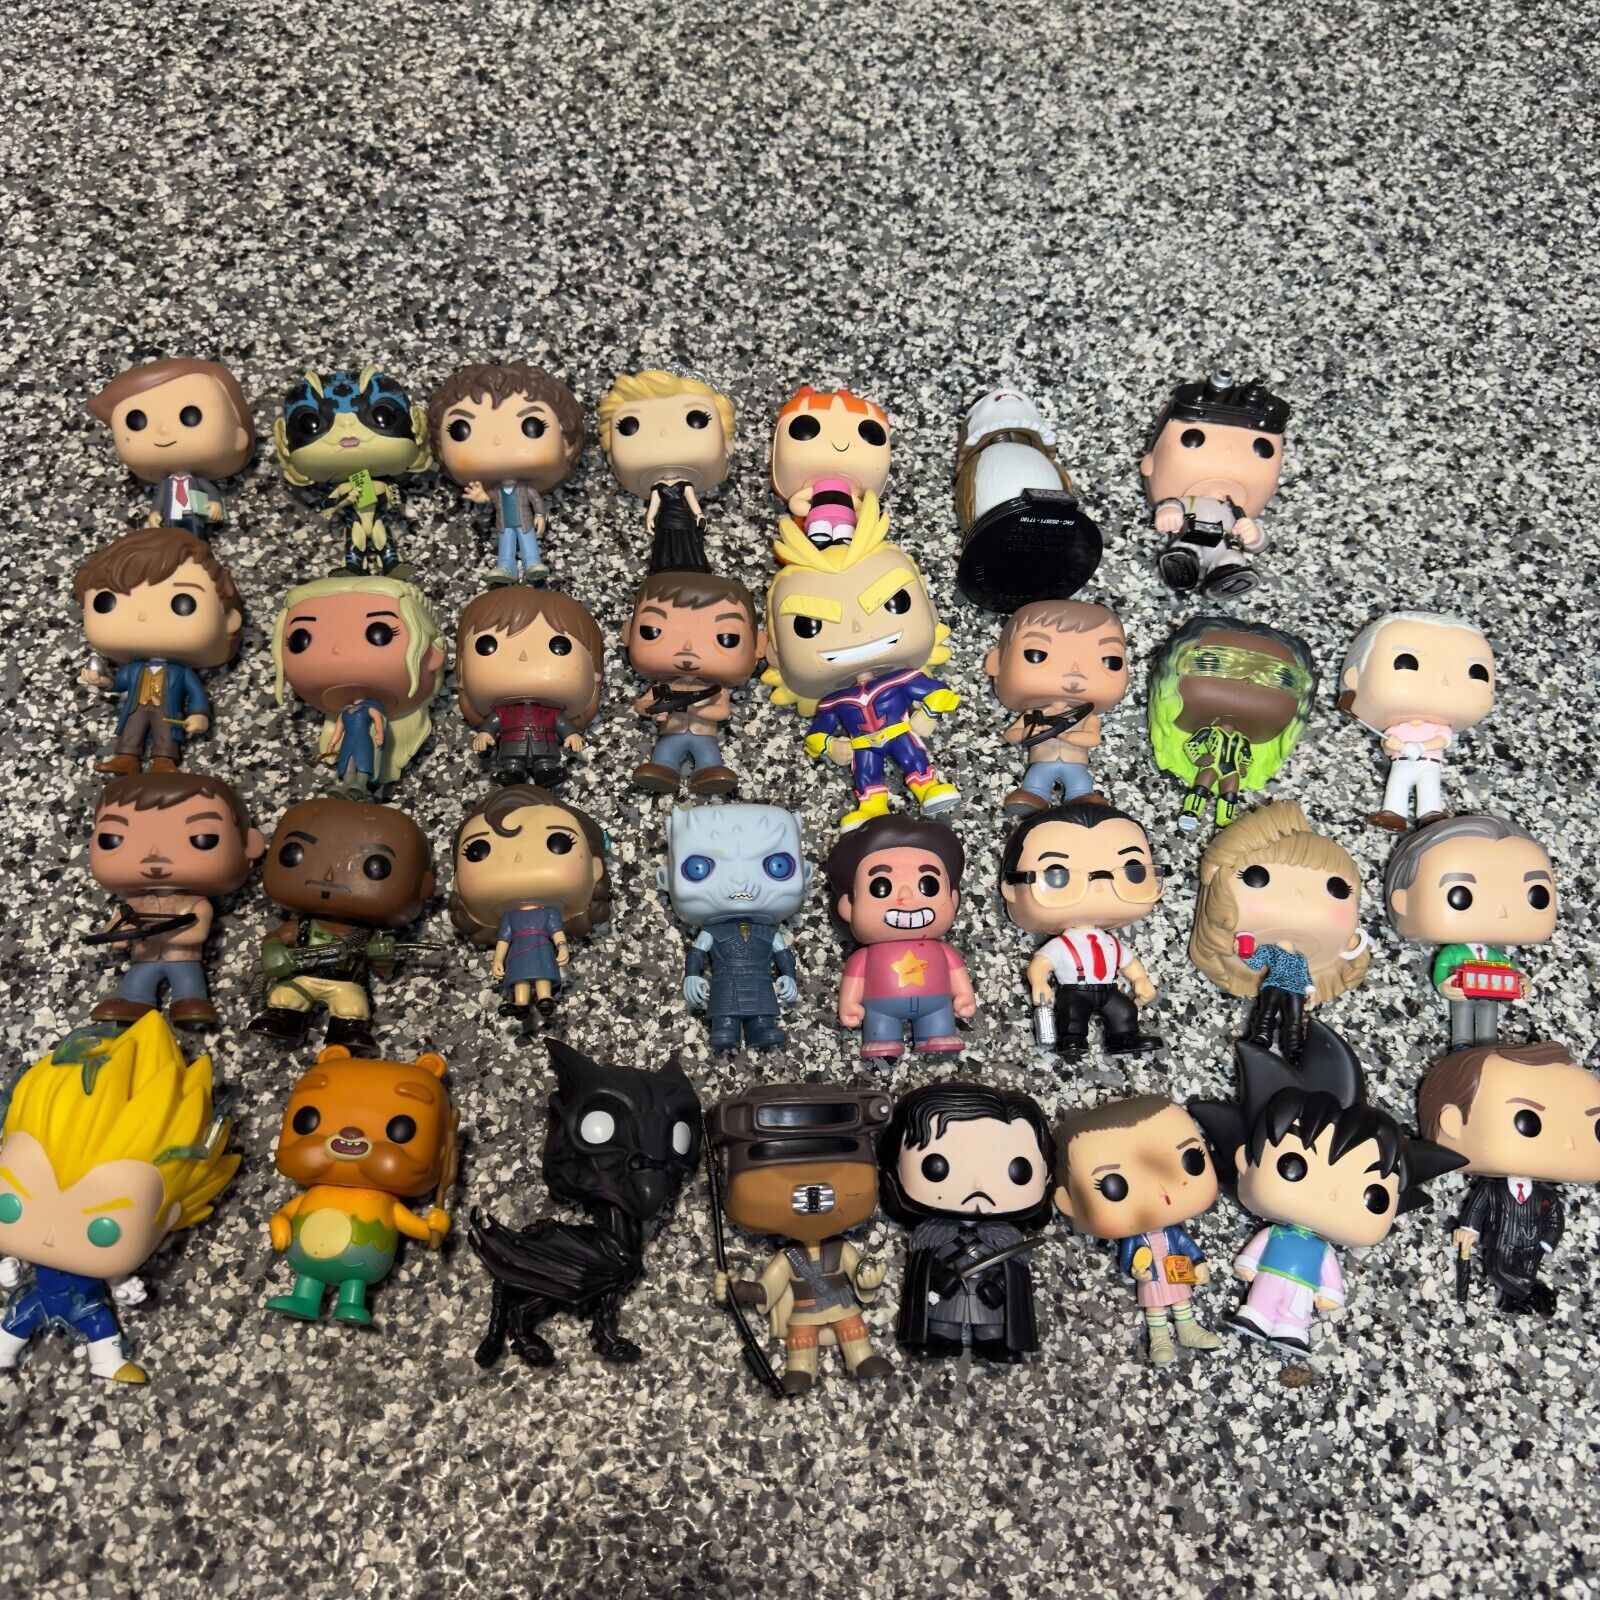 31 Movie Tv Show Game of Thrones Stranger Things Funko Pop Figure Toy OOB LOT